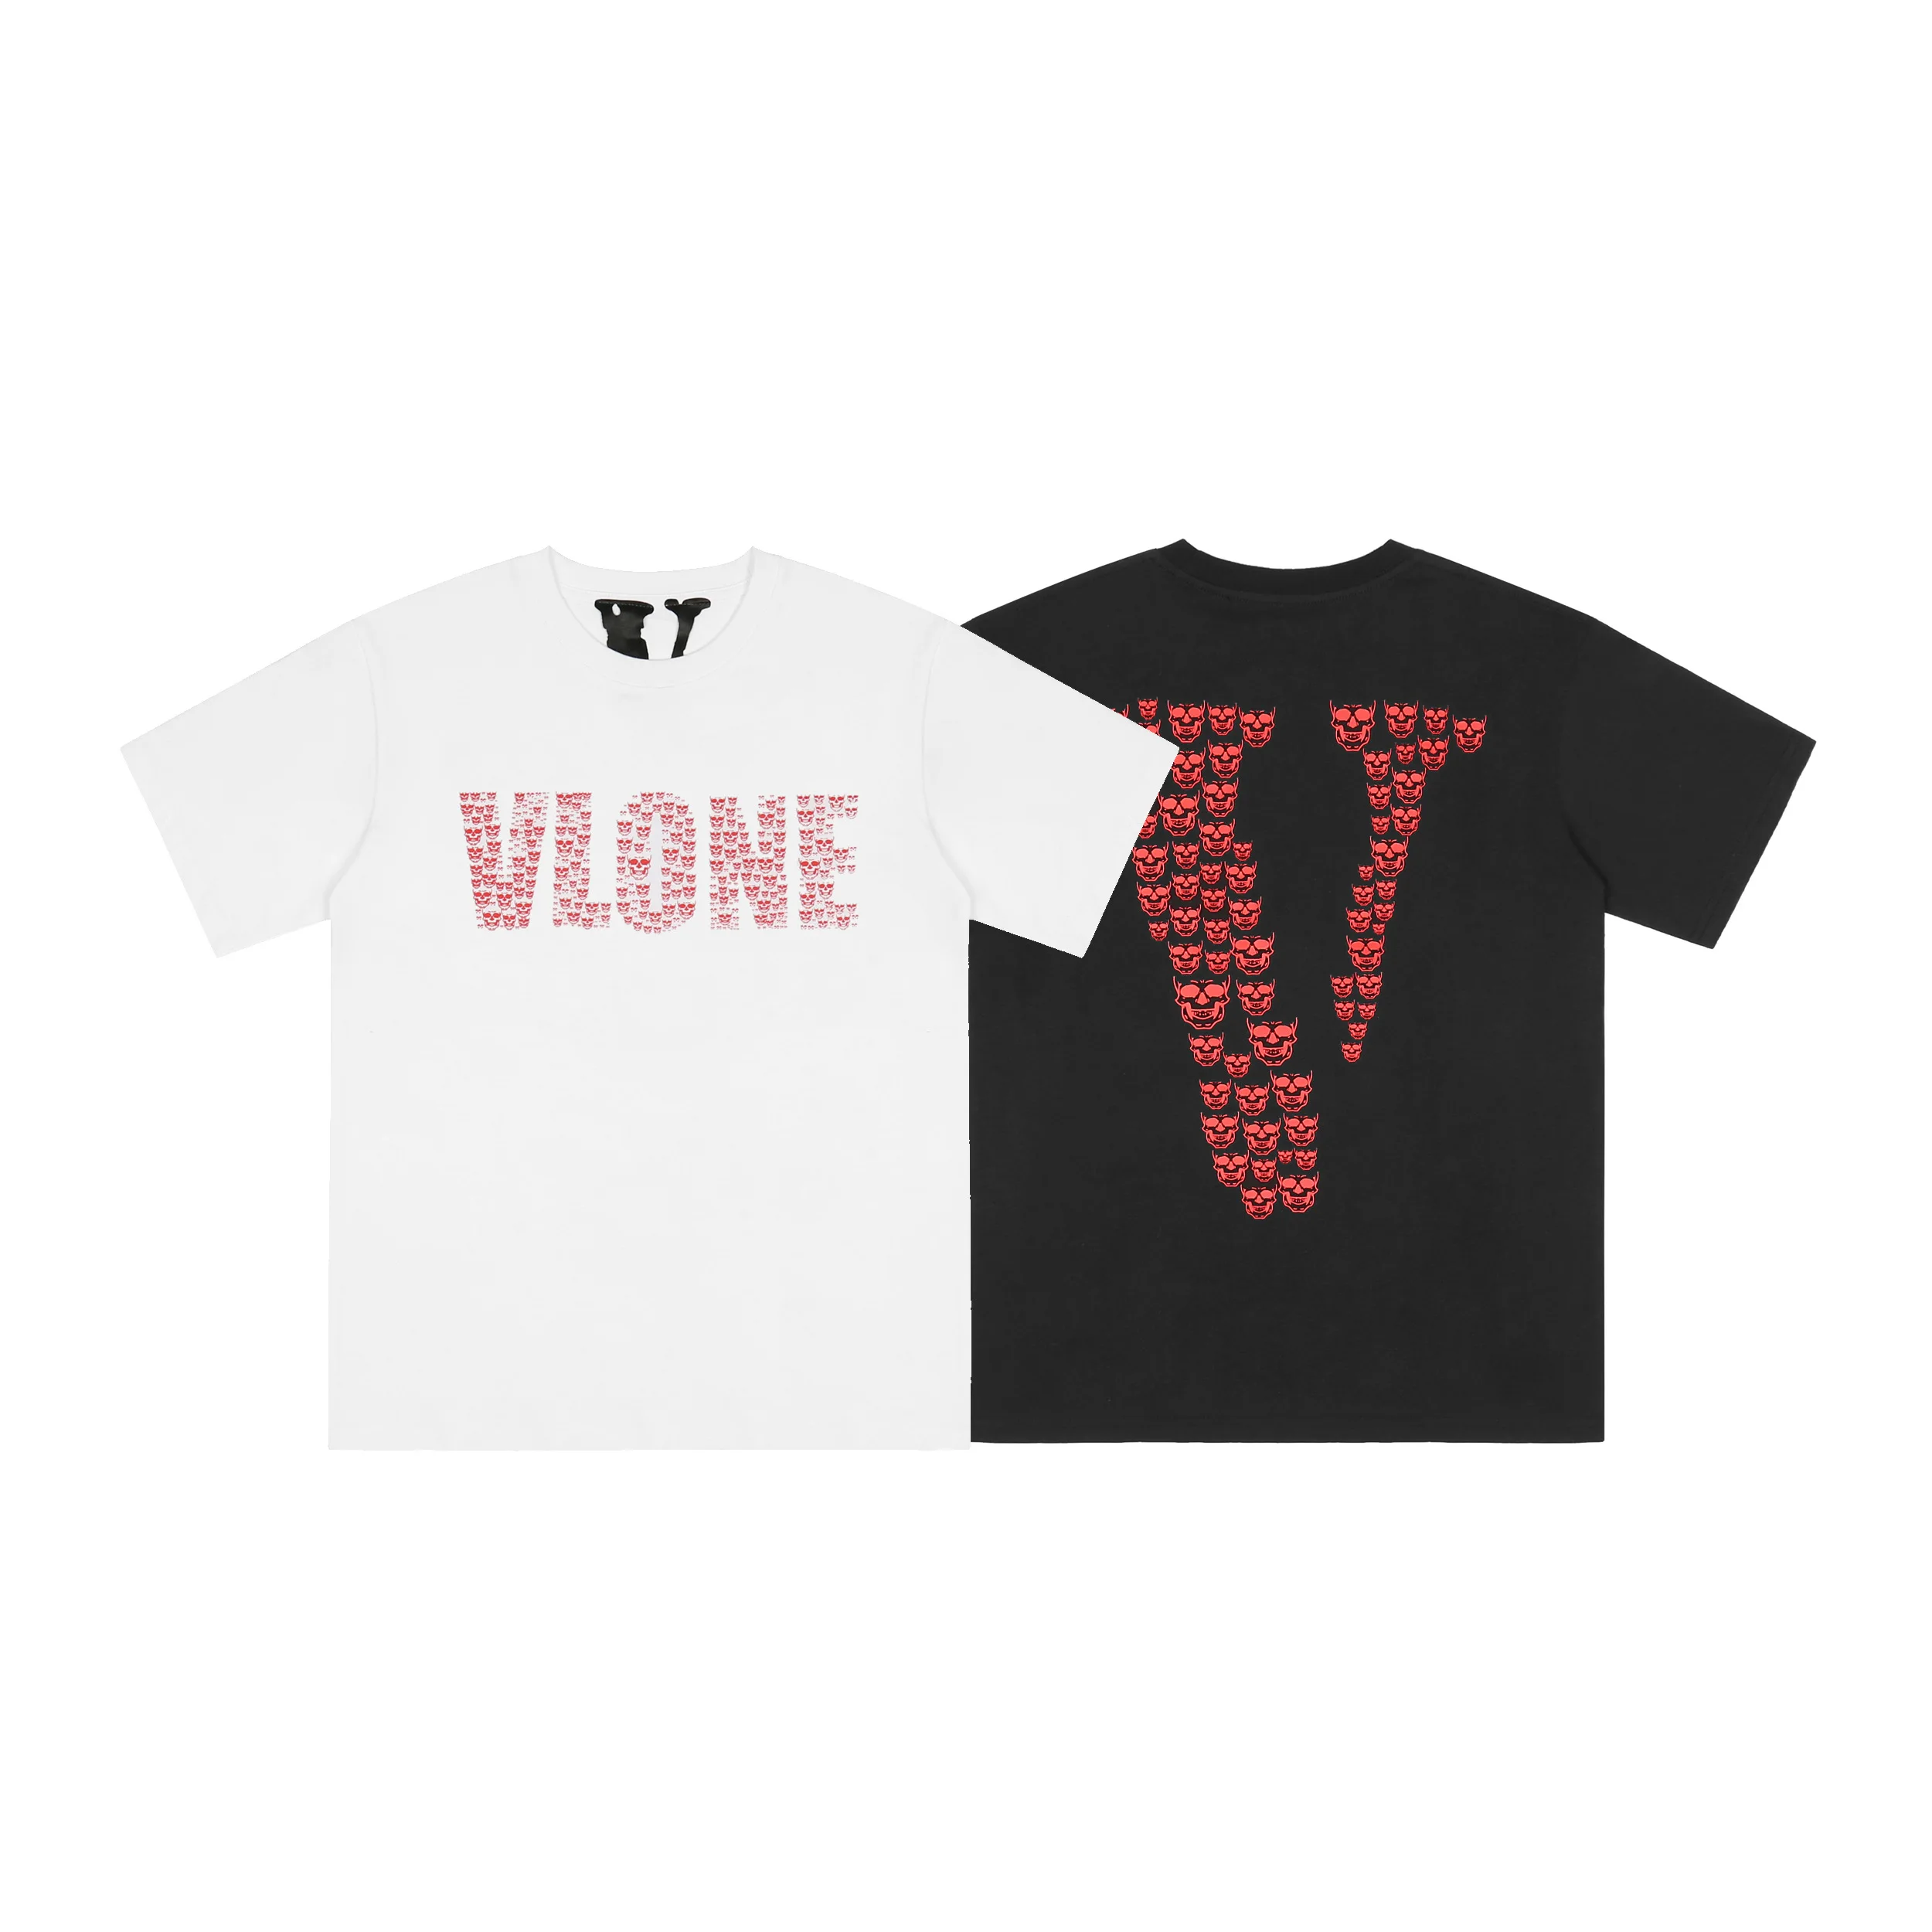 

VLONE Men's / Women's Couples Casual Fashion Trend High Street Loose HIP-HOP100% Cotton Printed Round Neck T-Shirt 6146